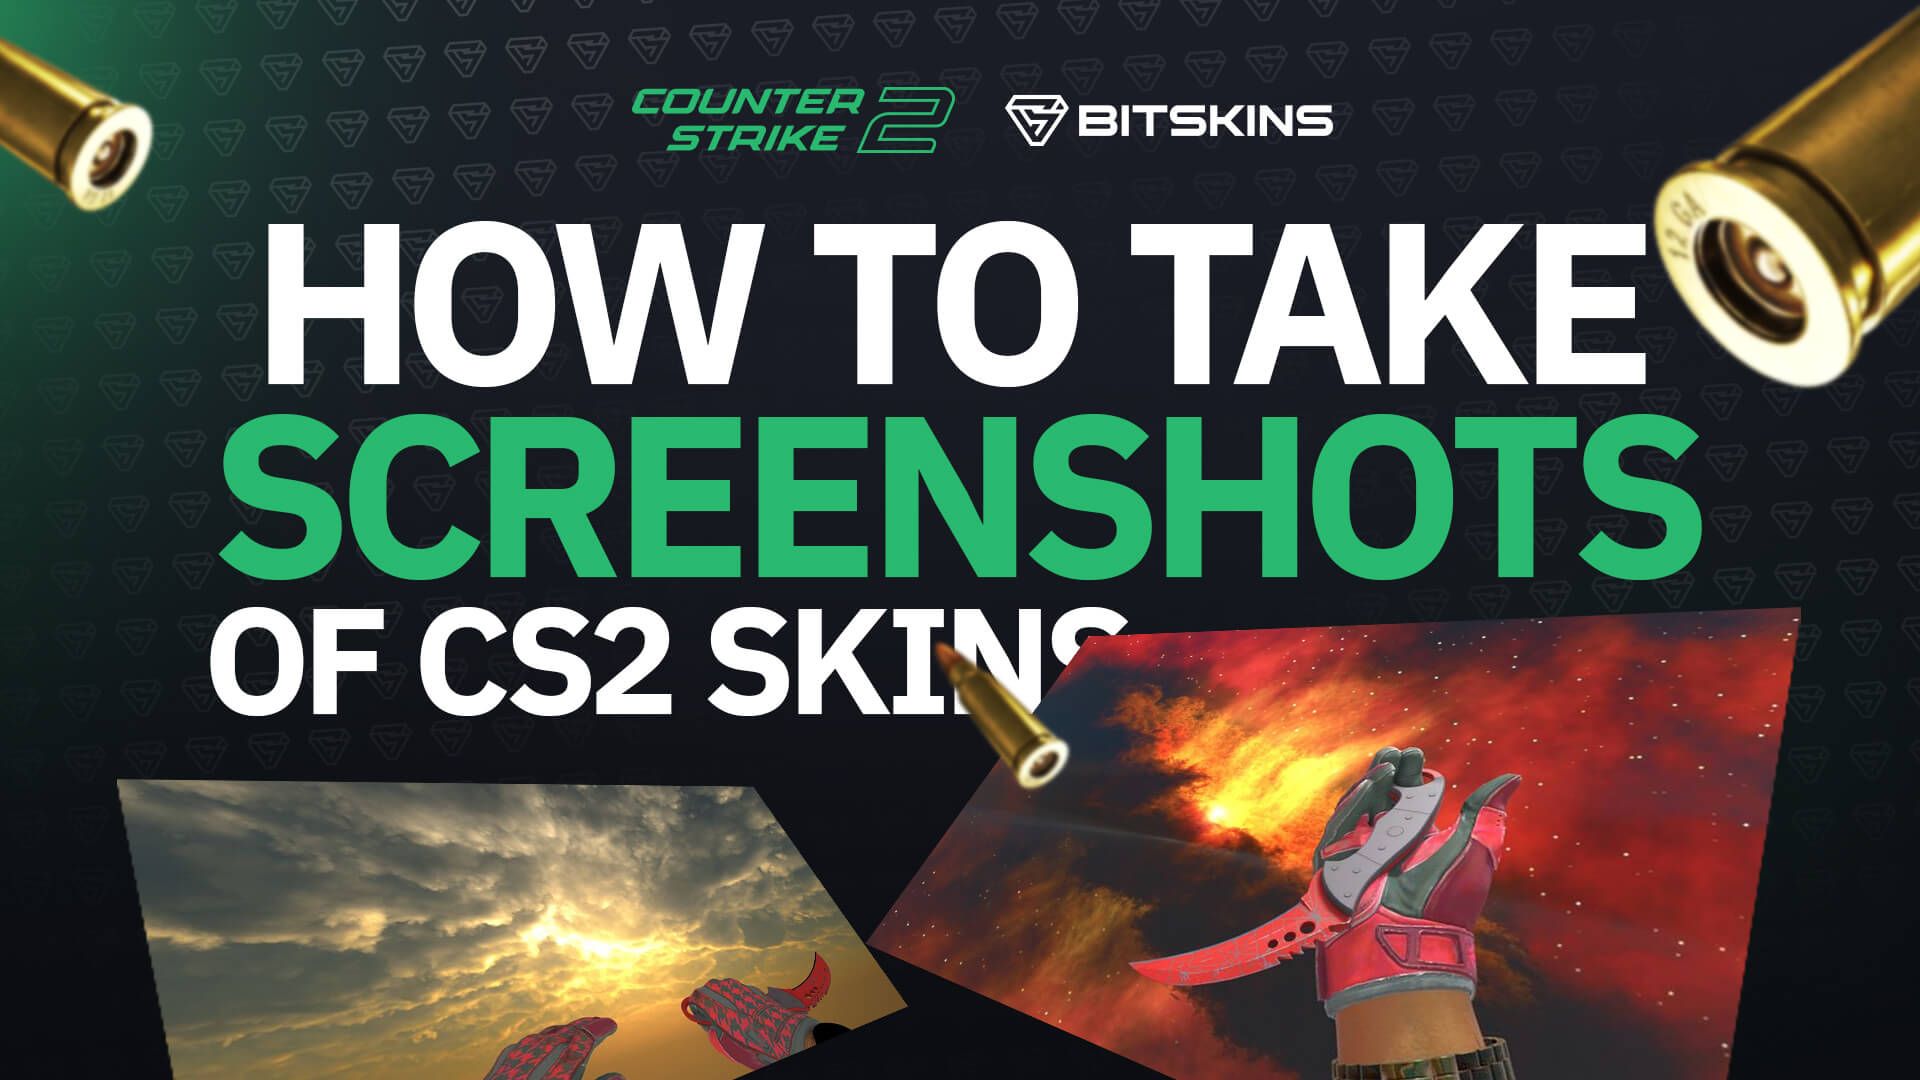 How to Inspect and Take Screenshots of CS2 Skins